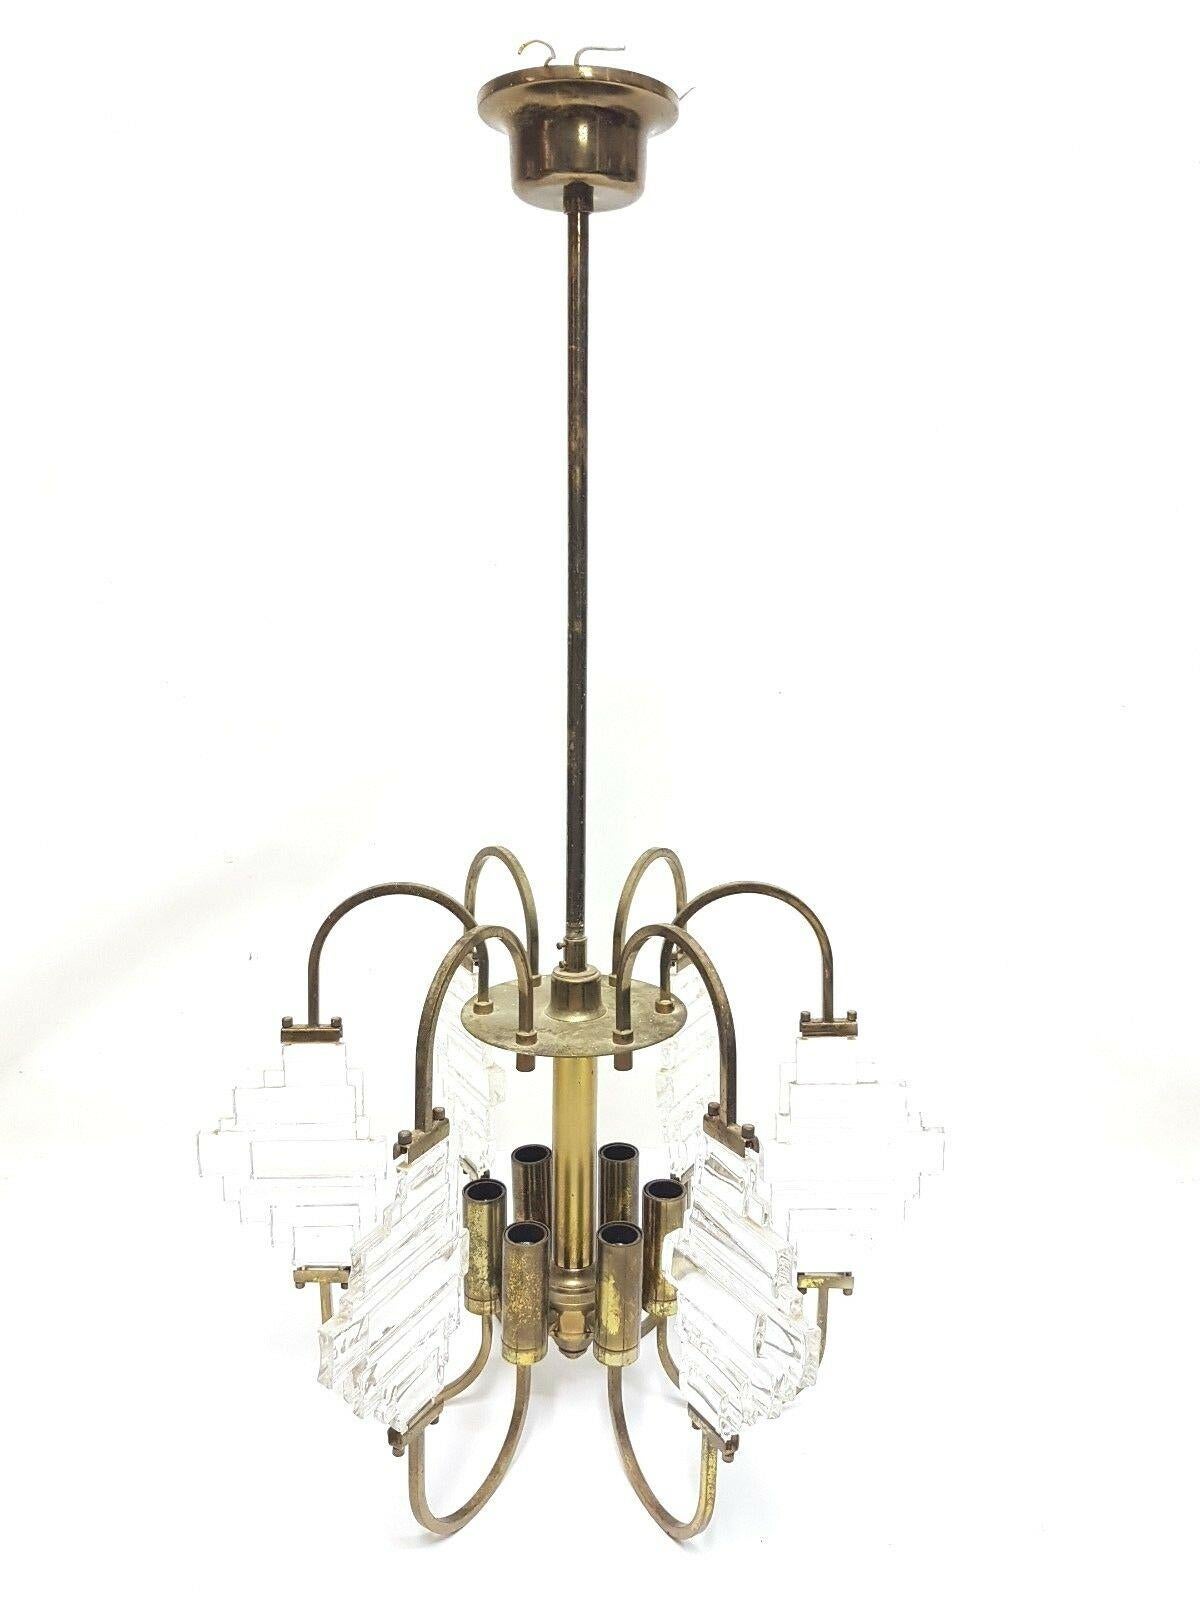 6-light chandelier design Stilkronen, 1960s

Original 60s chandelier, stilkronen production, burnished brass structure
And six tiered glass manufacturing

It measures 40 cm only the luminous part, total height 85 cm

Glass in perfect